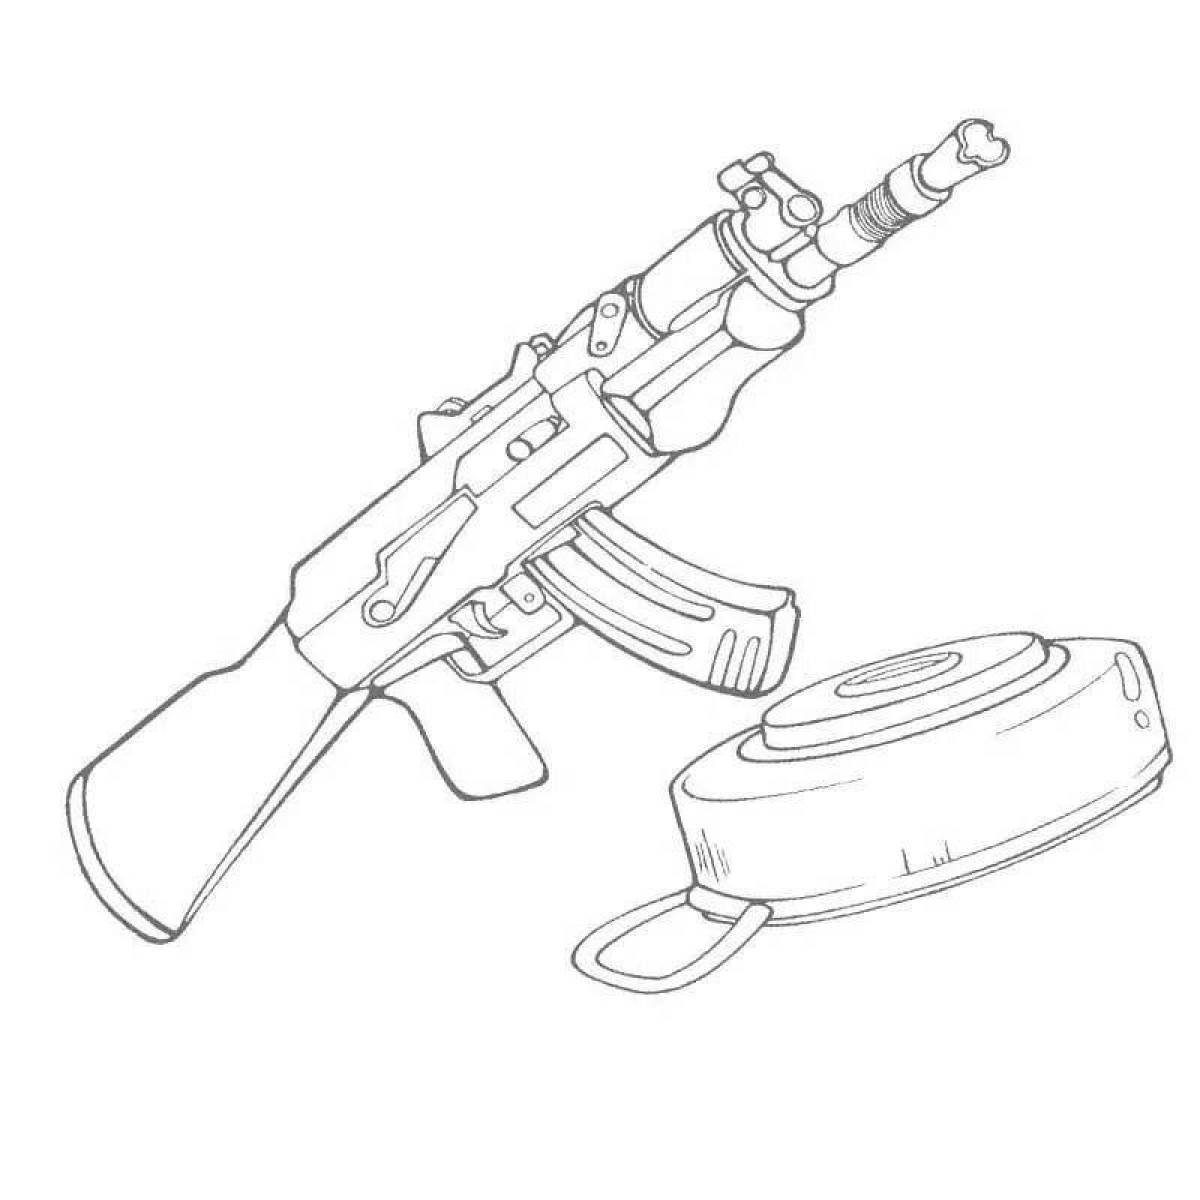 Tempting weapon coloring page